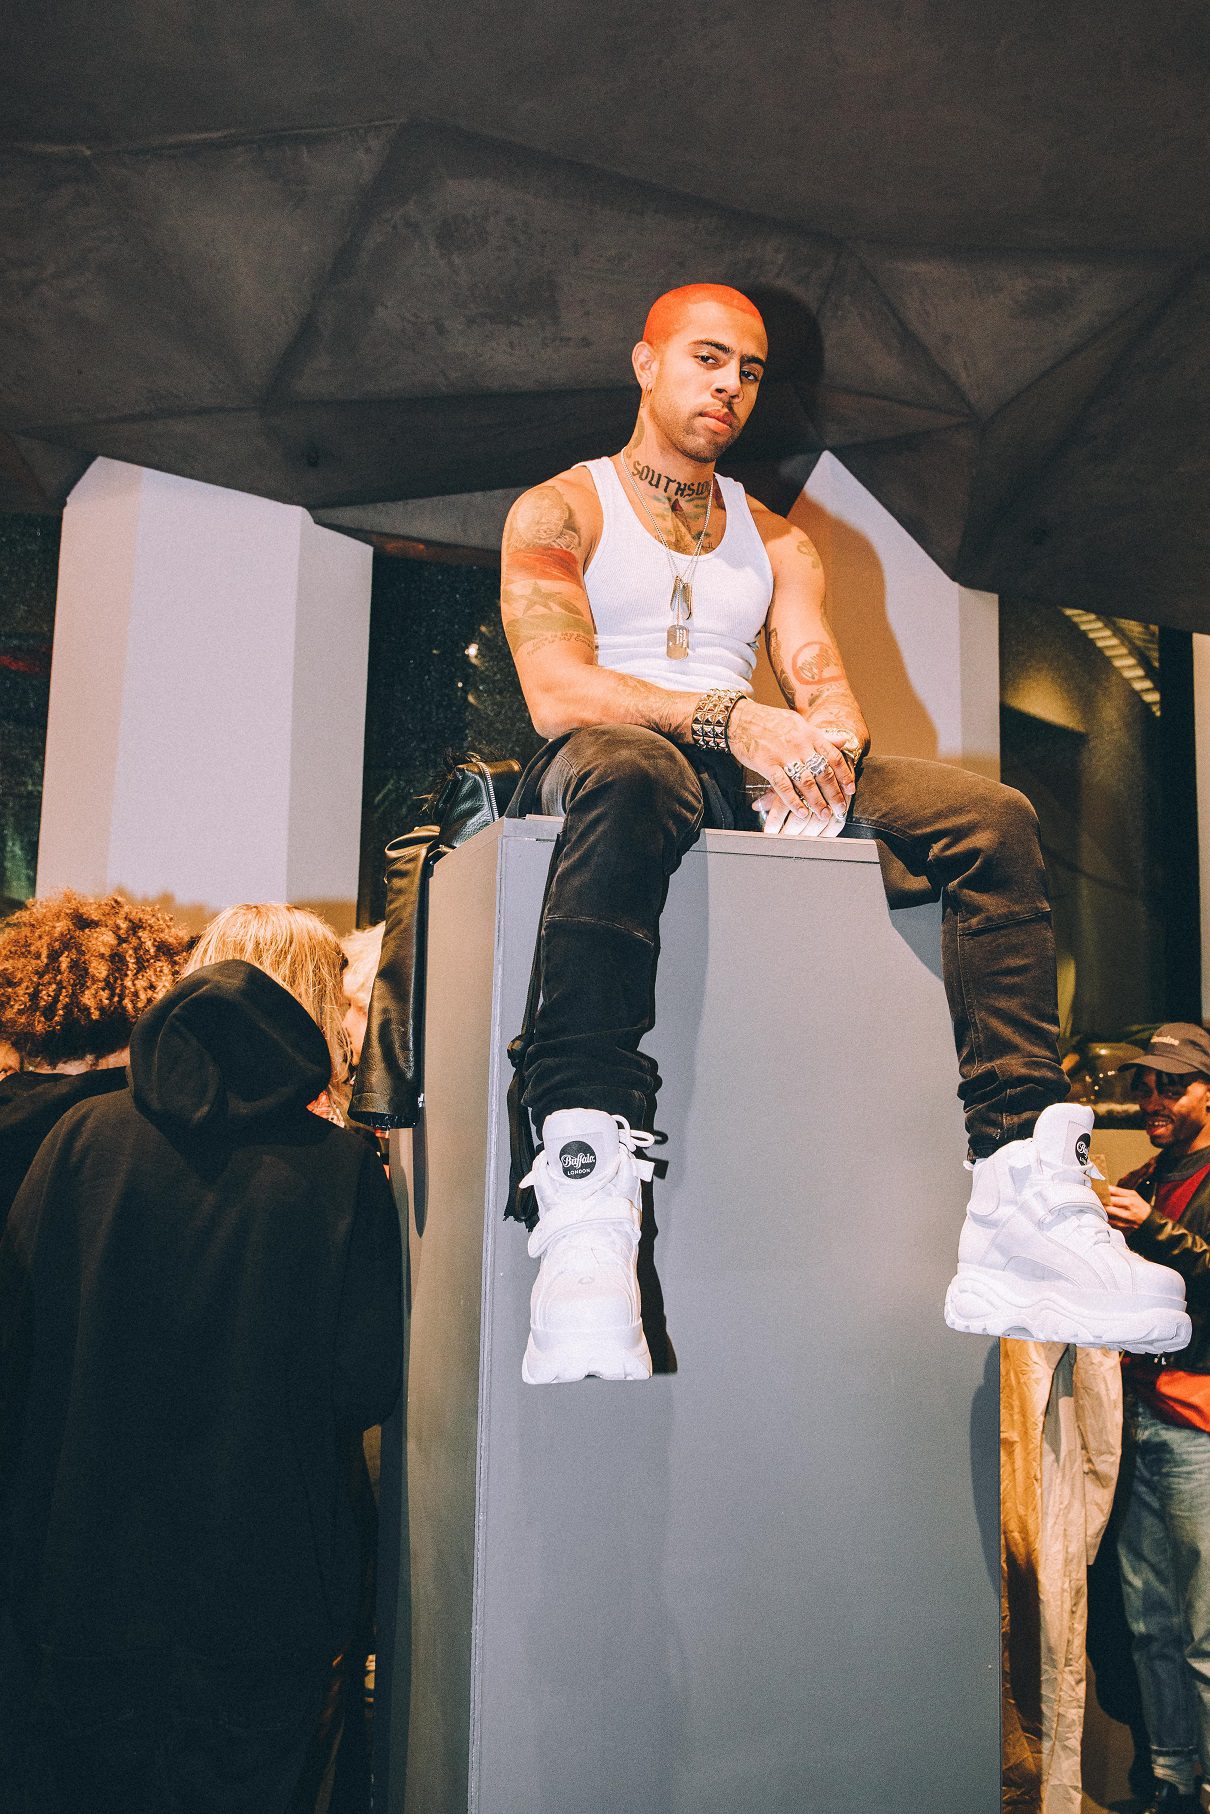 chap meget fint kapacitet BUFFALO LONDON MAKES NYFW DEBUT AT NEXT CENTURY FEATURING VIC MENSA,  CLERMONT TWINS & ASIAN DOLL - The Garnette Report